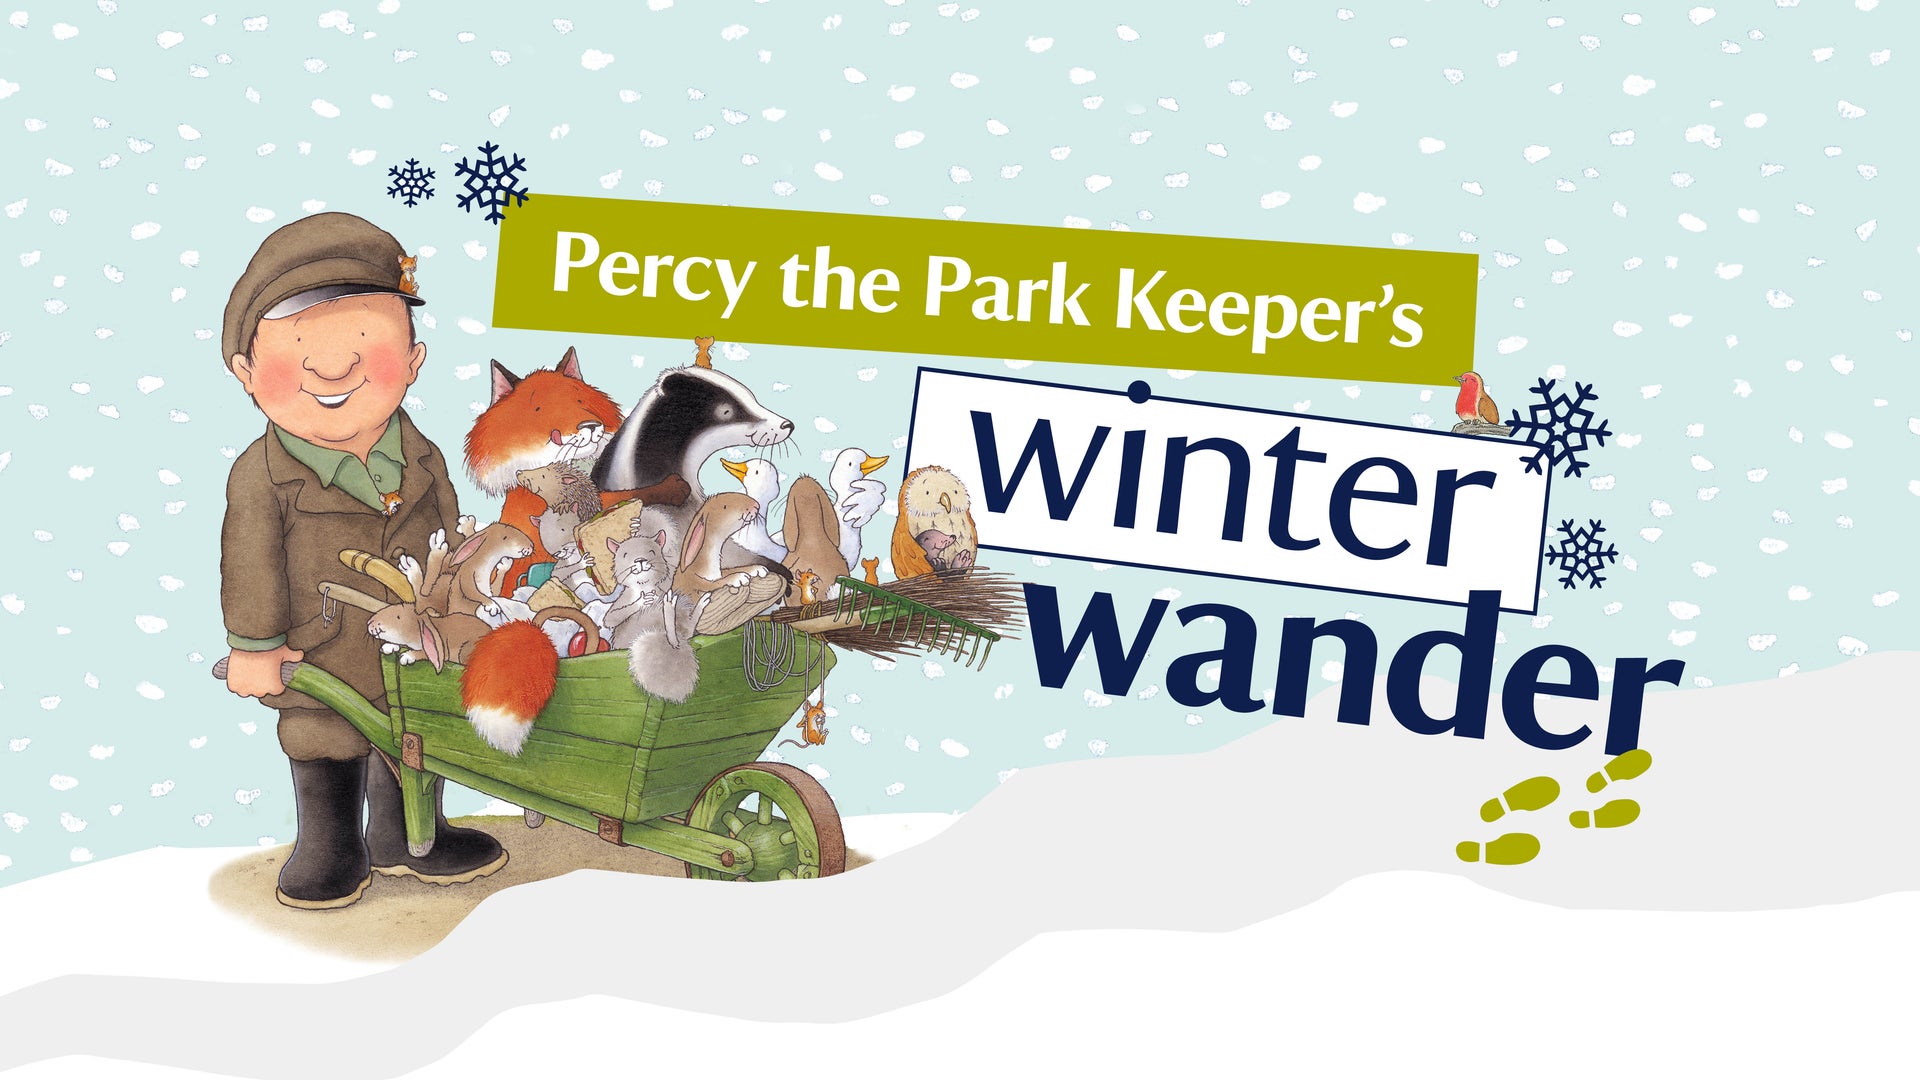 Percy the Park Keeper and his animal friends at Kedleston Hall - Derby Days Out